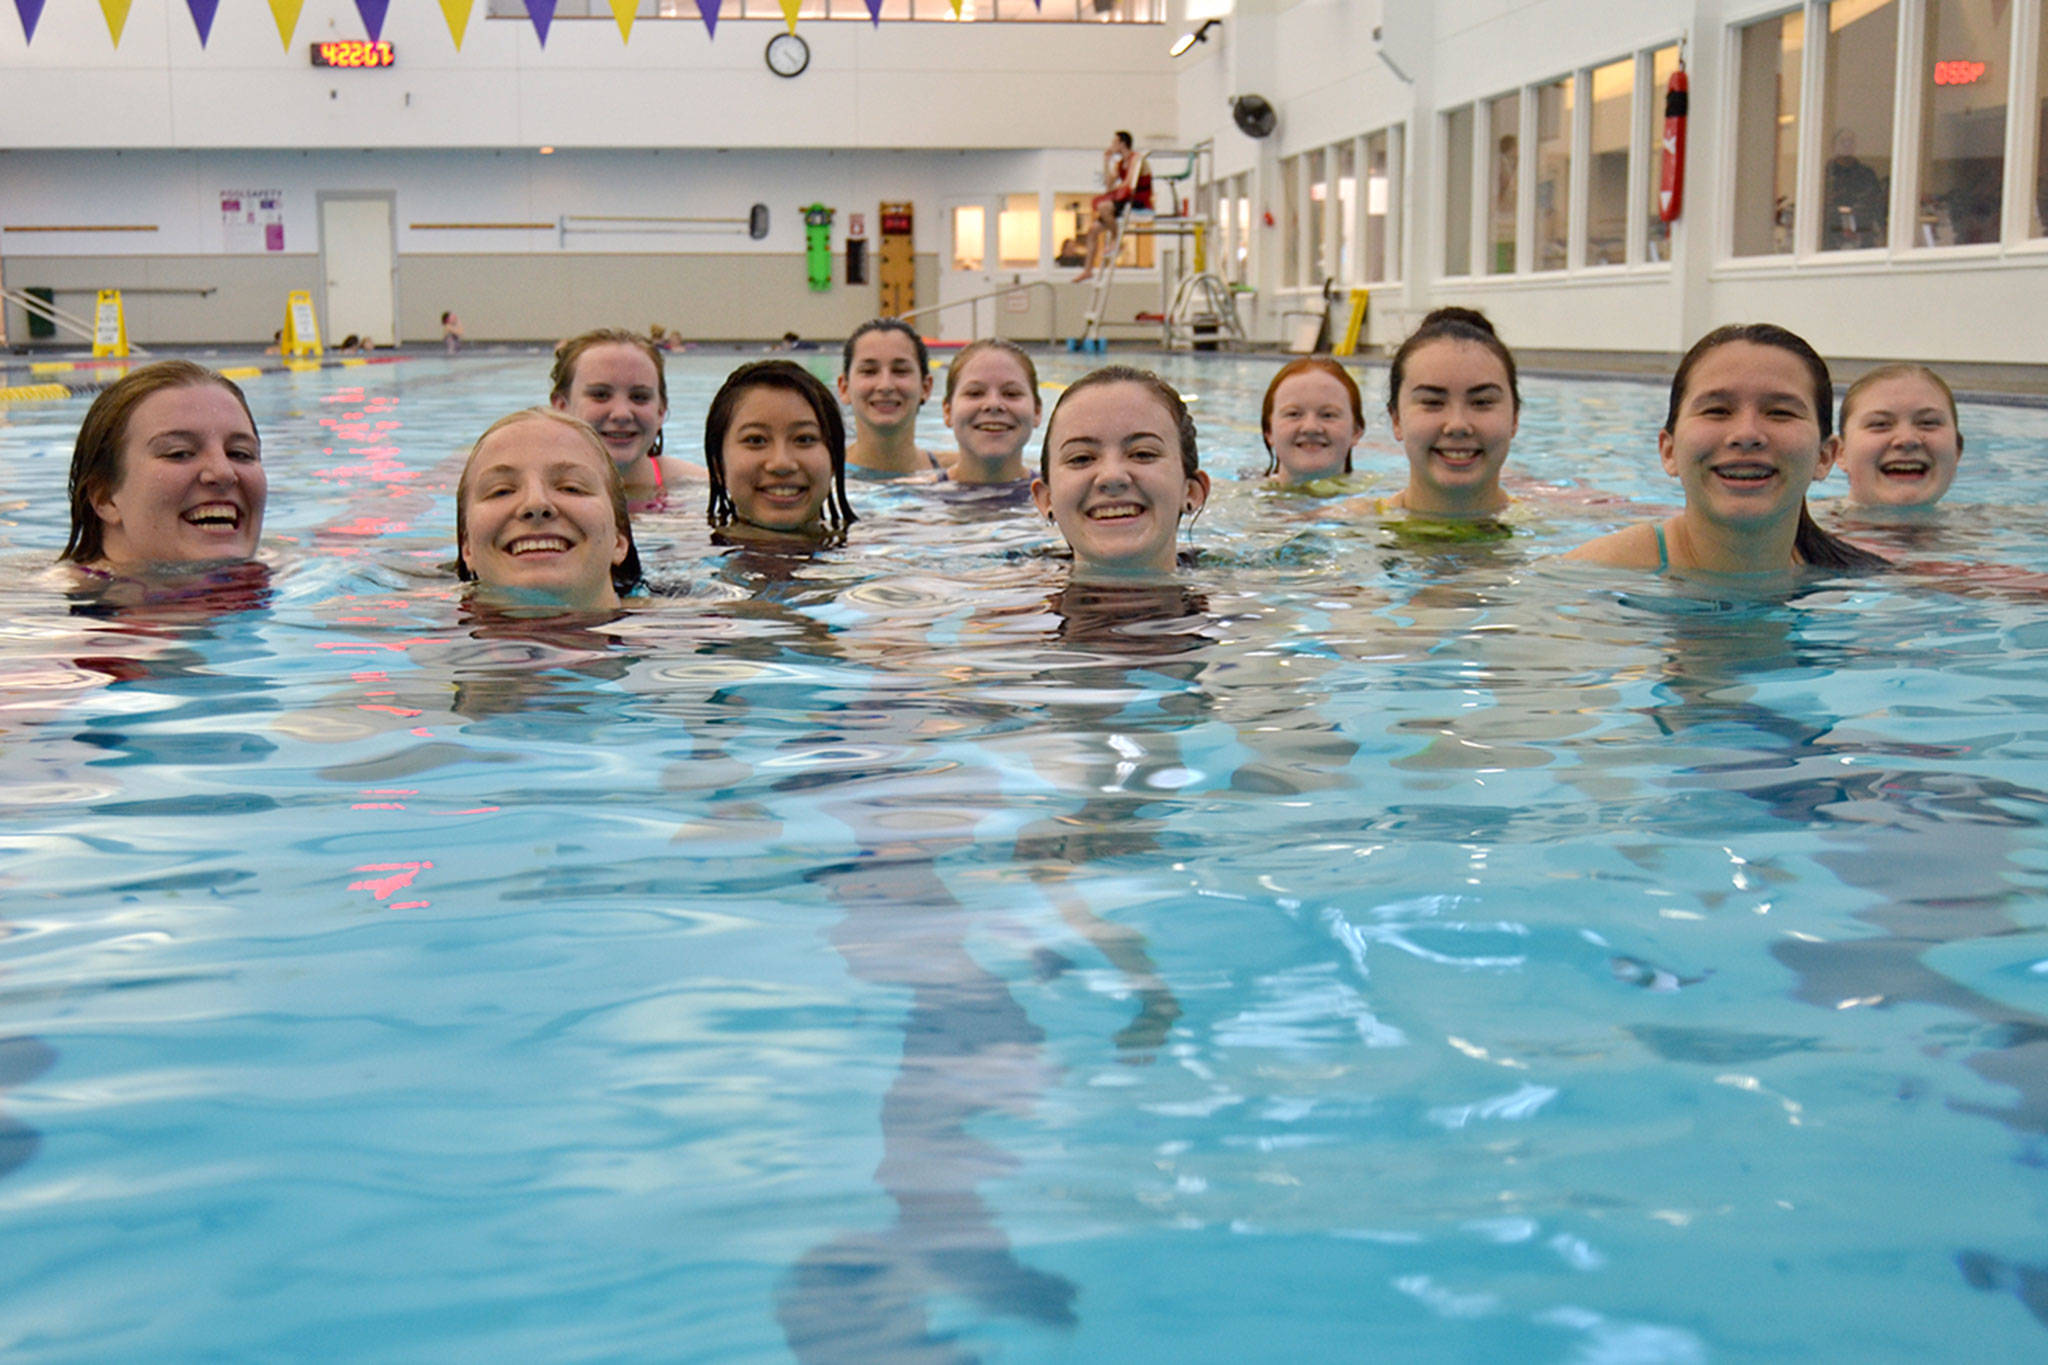 Swimmers competing at the 2A district meet include, from left, Amanda Murphy, Annabelle Armstrong, Chloe McKay, Jasmine Itti, Irene Stello, Morgan Cariou, Sydney Swanson, Heidi Schmitt, Sydnee Linnane, Sonja Govertsen, and Claire Cronin. Not Pictured are Aleah Chen and Eislynn Flood. Sequim Gazette photo by Matthew Nash